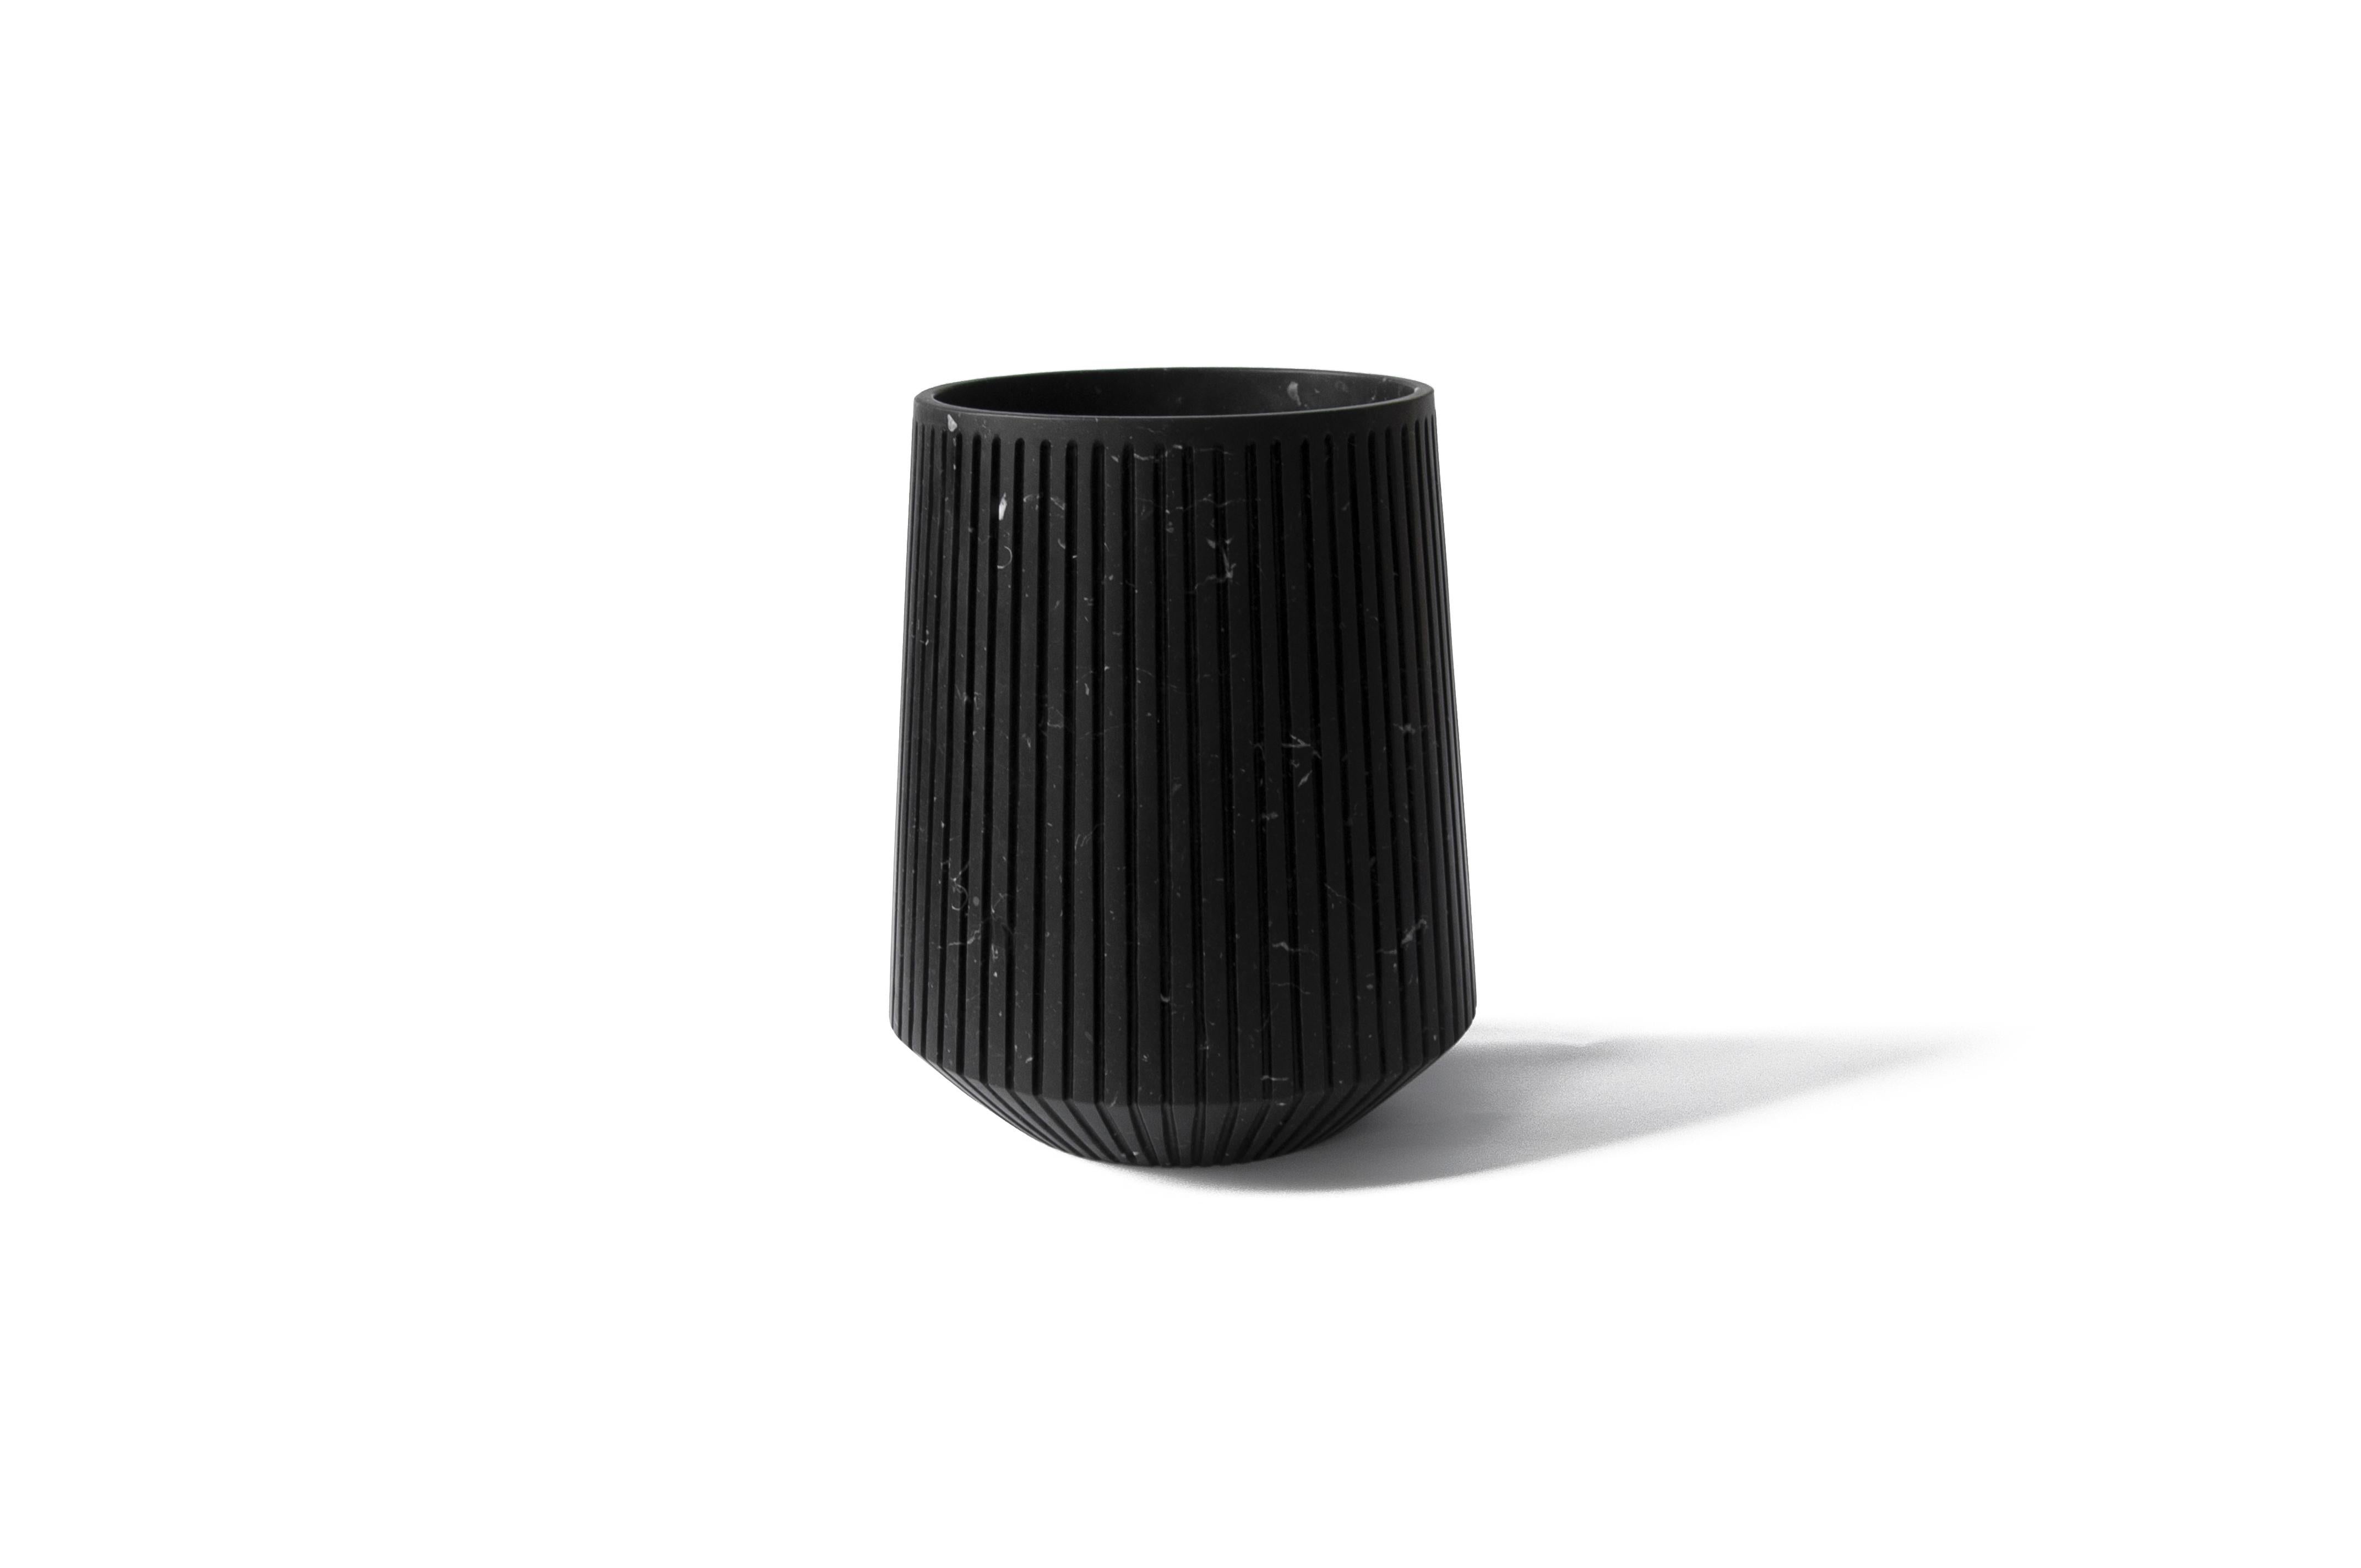 Striped wide vase in black Marquina marble.
-Jacopo Simonetti design for FiammettaV-
Each piece is in a way unique (every marble block is different in veins and shades) and handmade by Italian artisans specialized over generations in processing